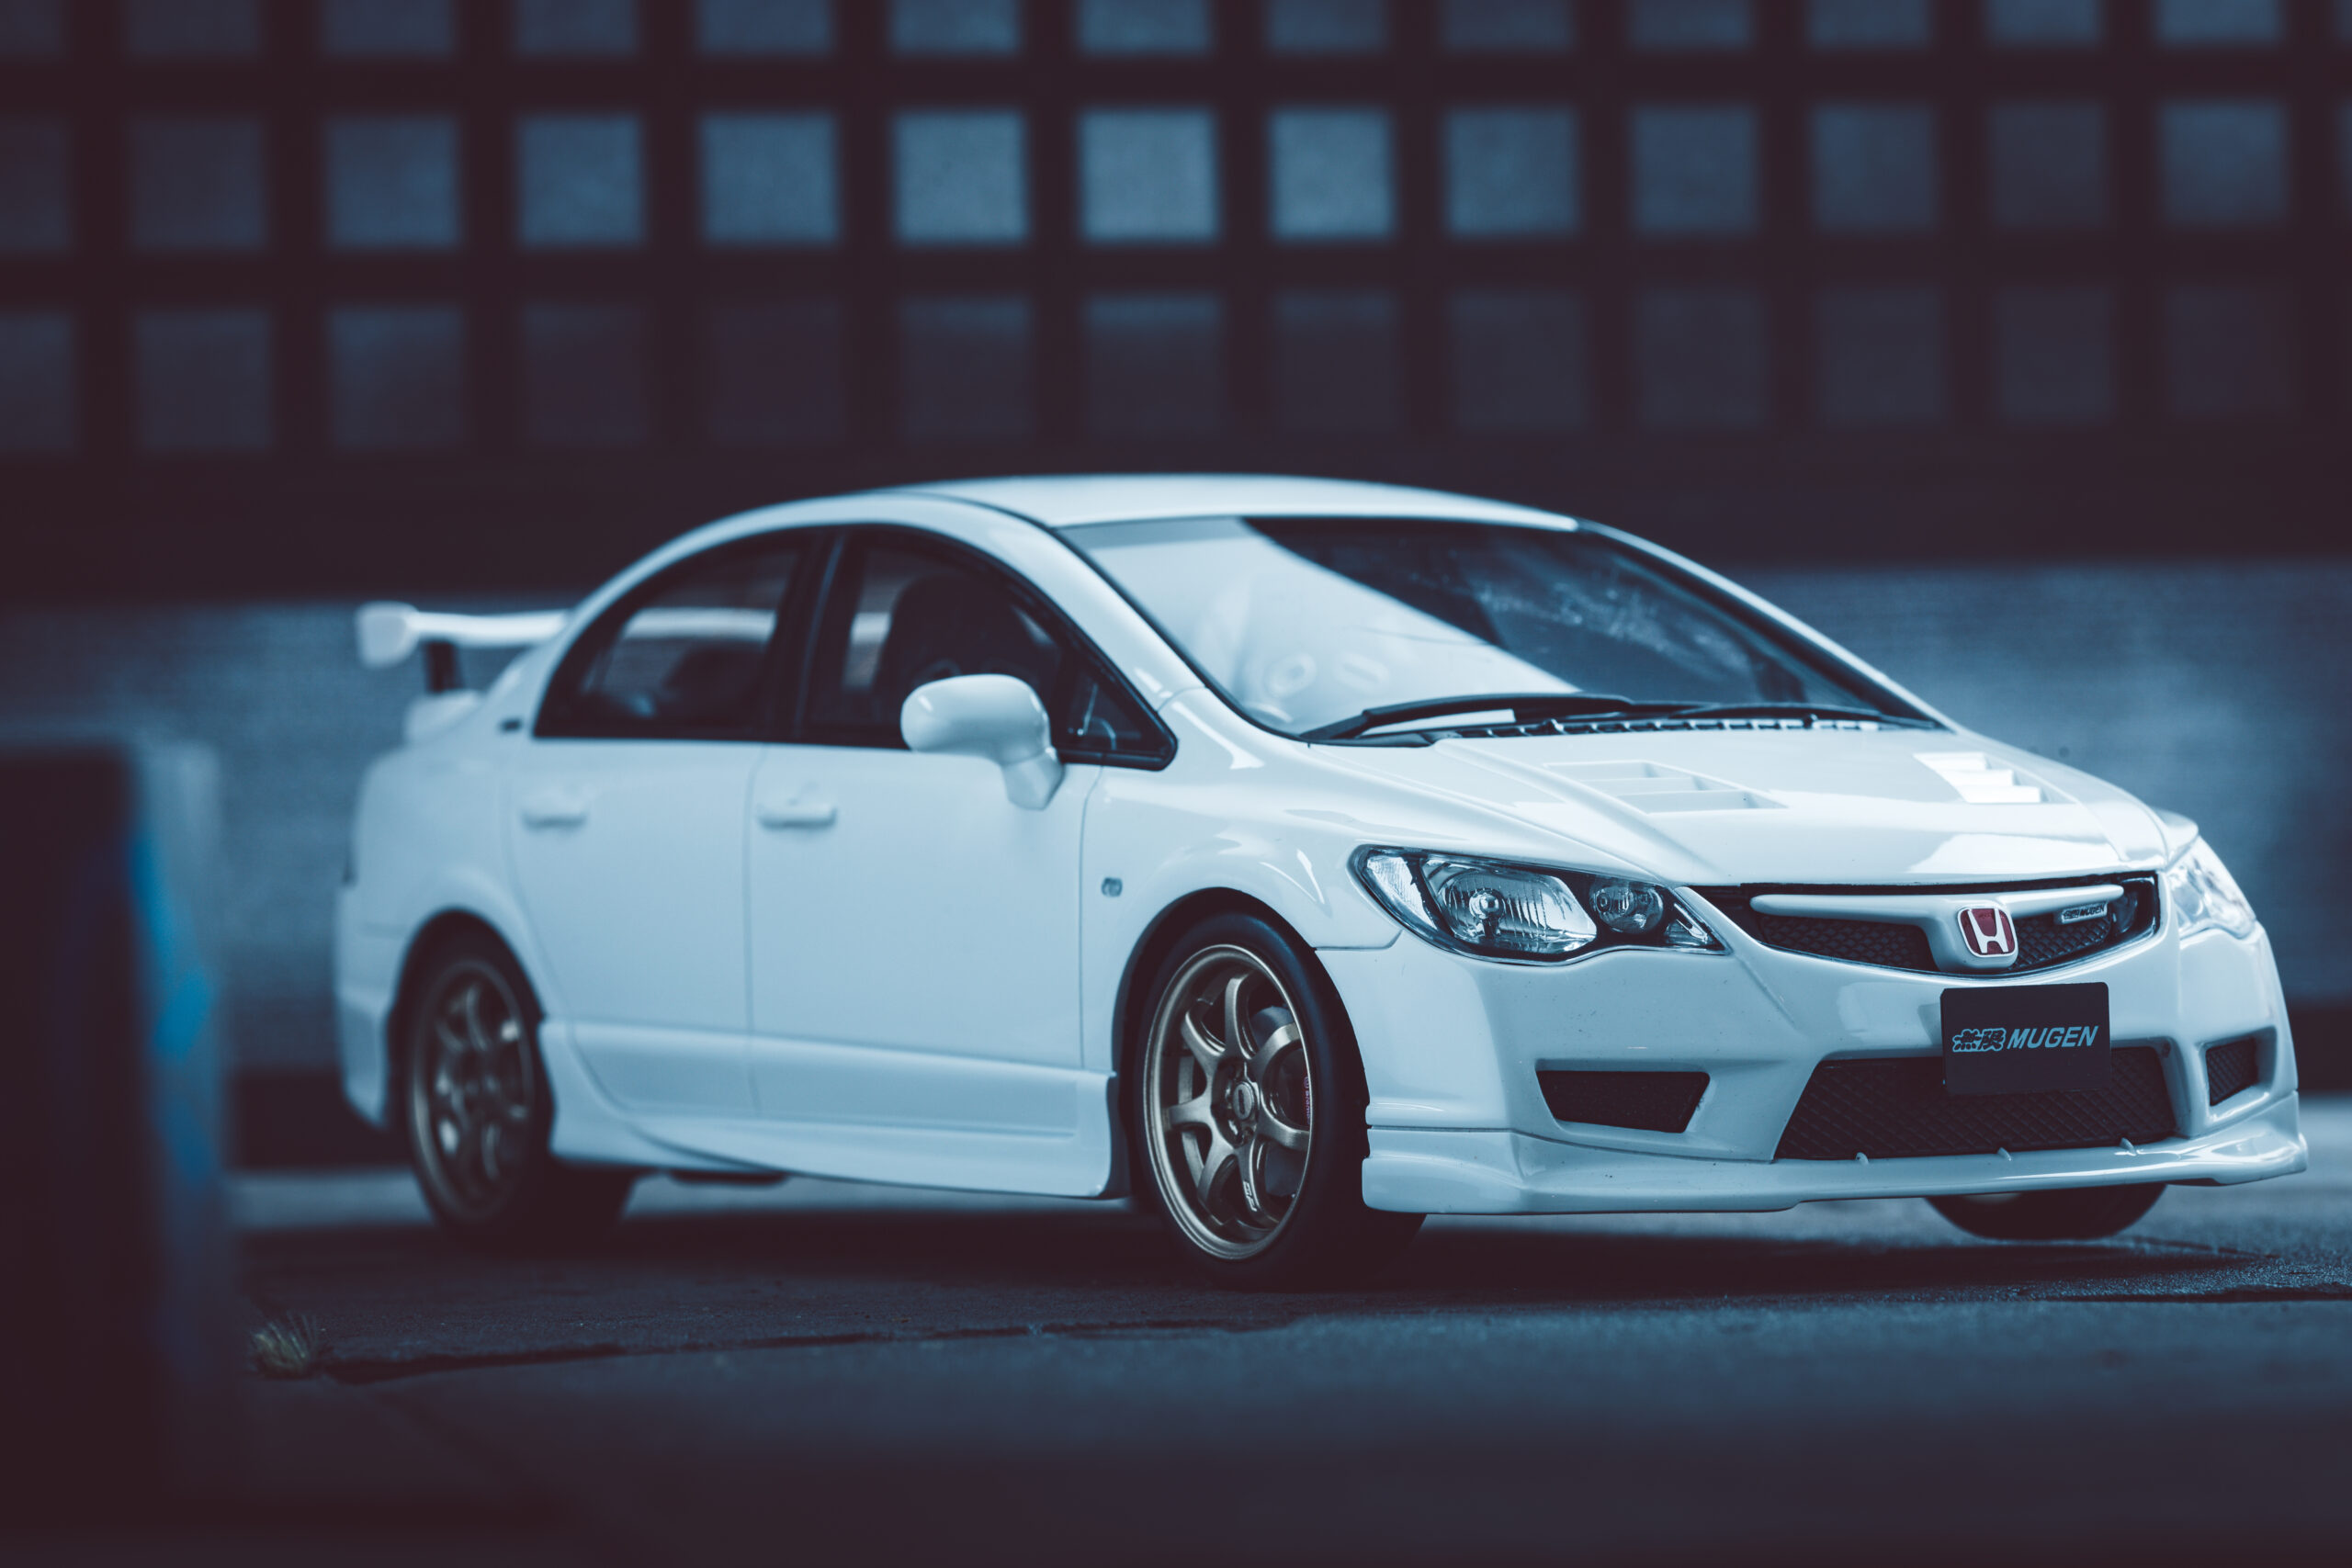 It ain´t easy to be a Civic owner - Castheads Magazine